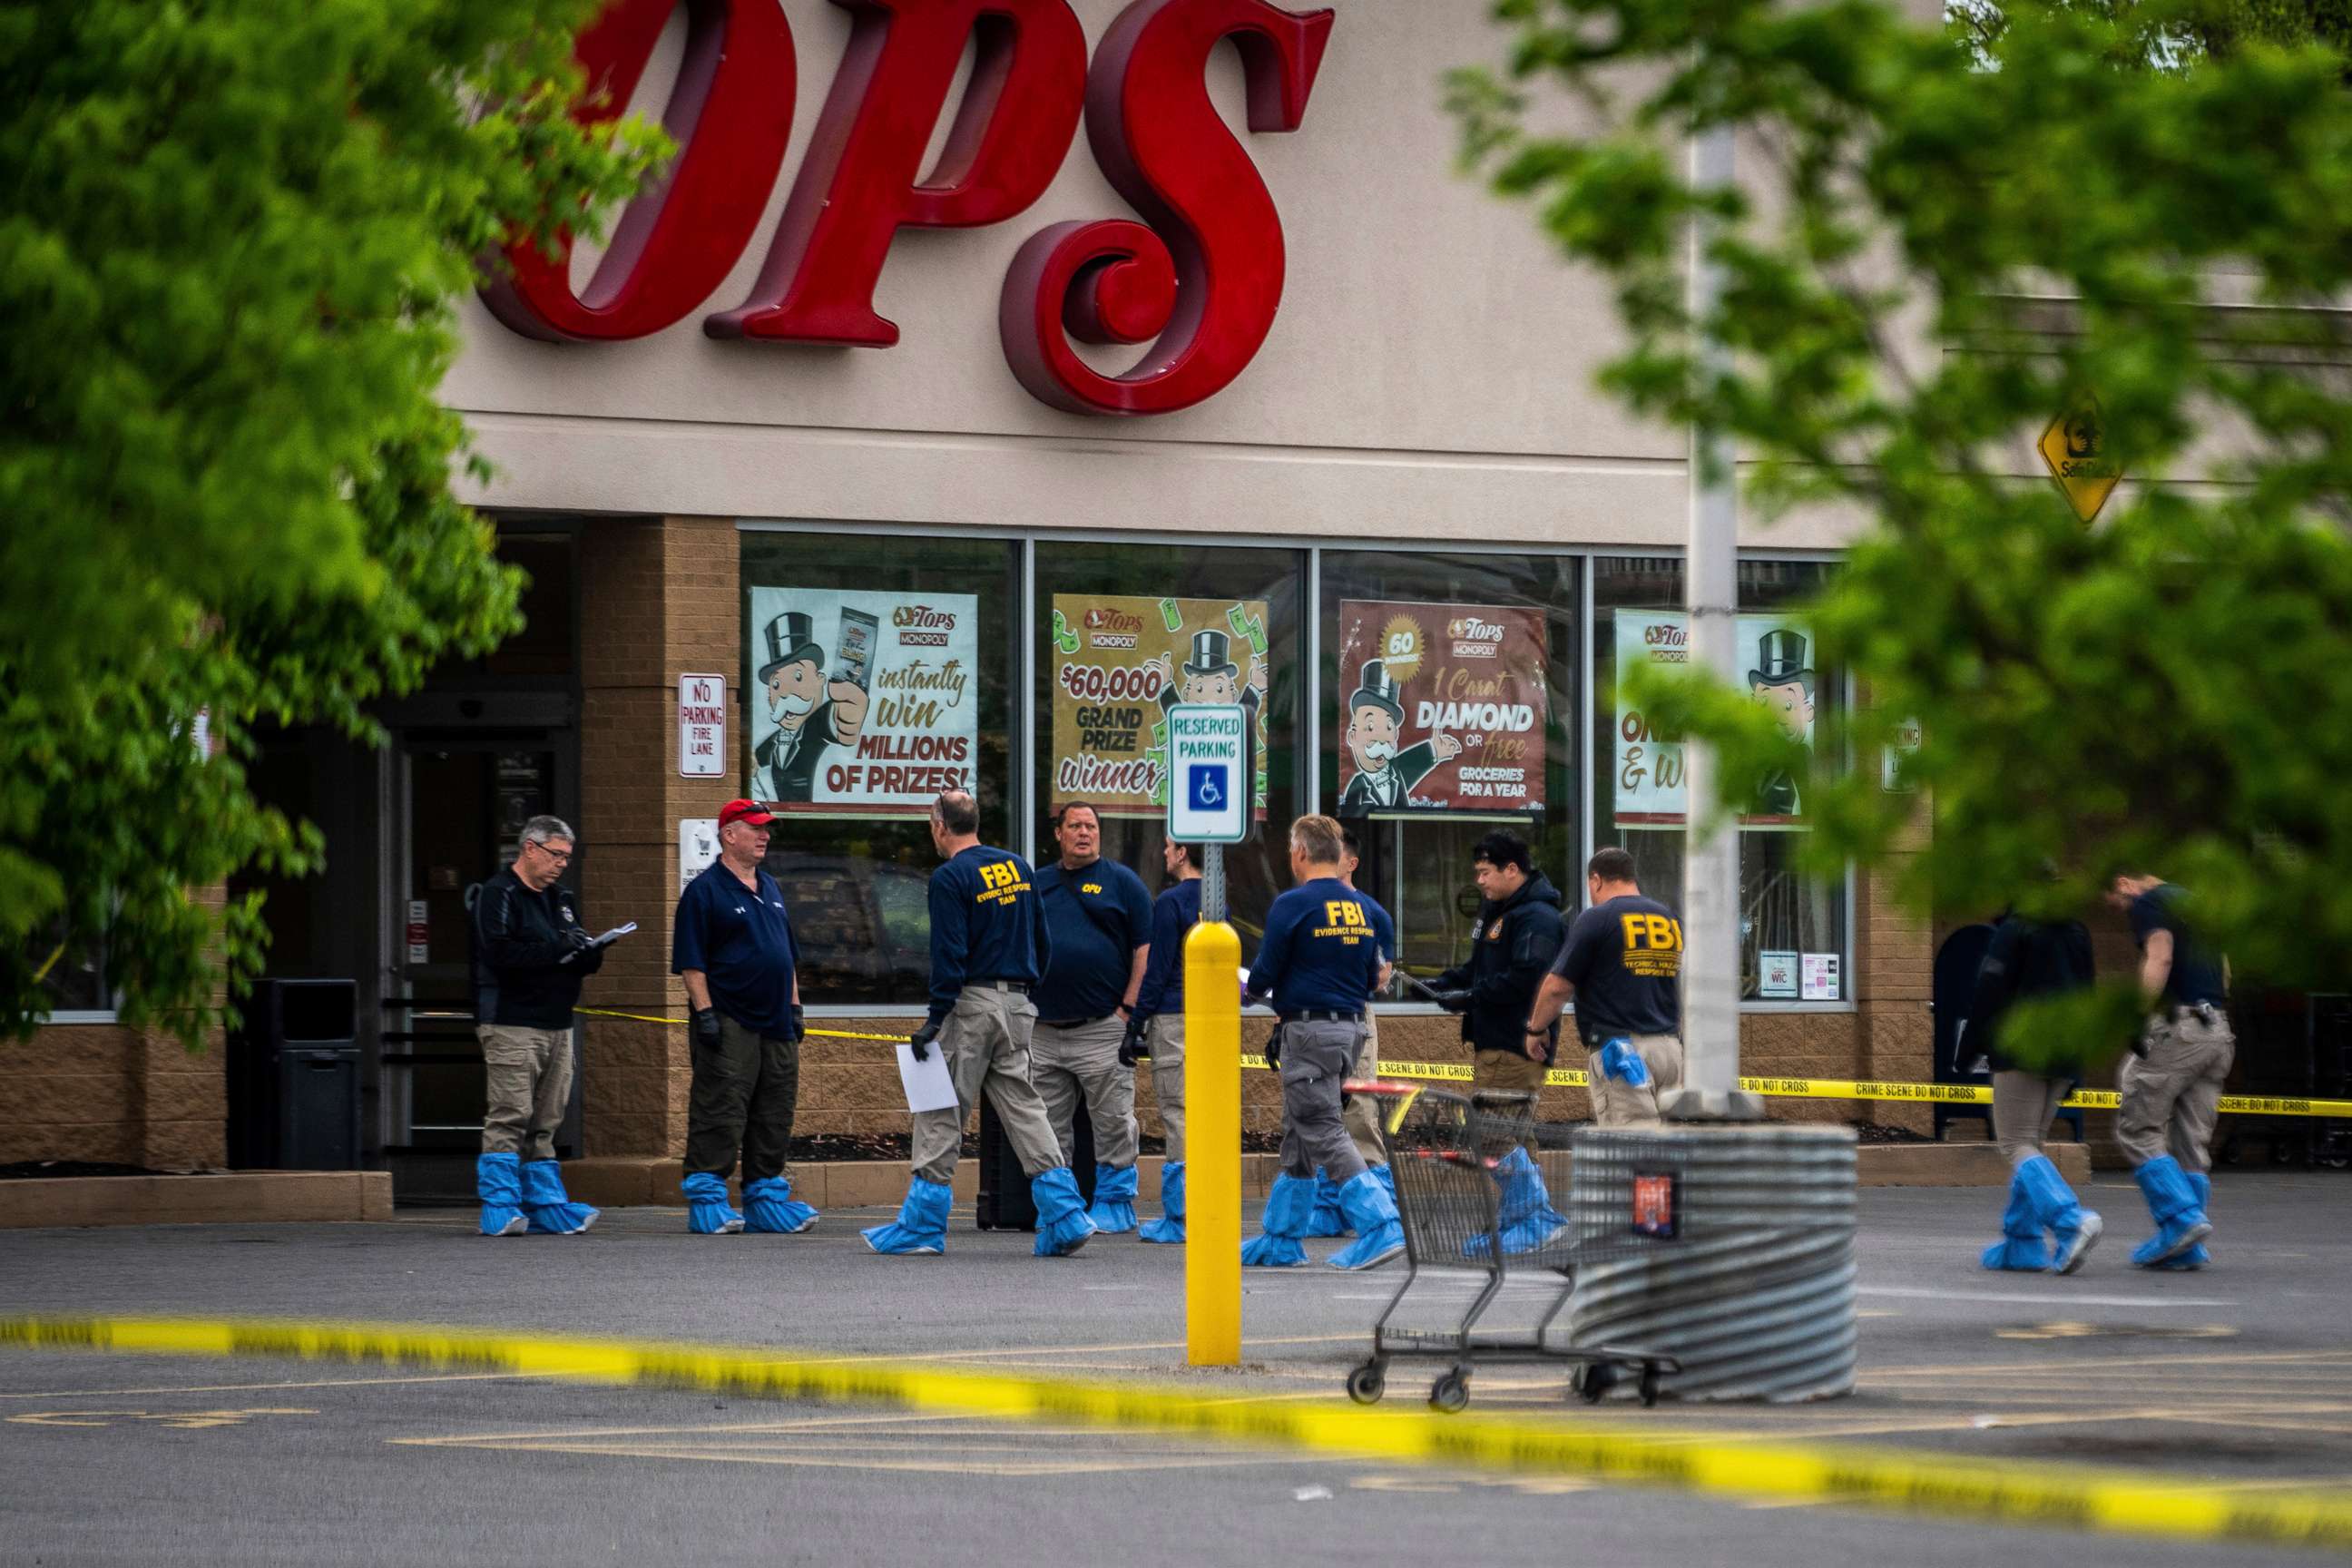 PHOTO: FBI Investigators enter the Tops supermarket in Buffalo, N.Y. on Monday, May 16 2022.